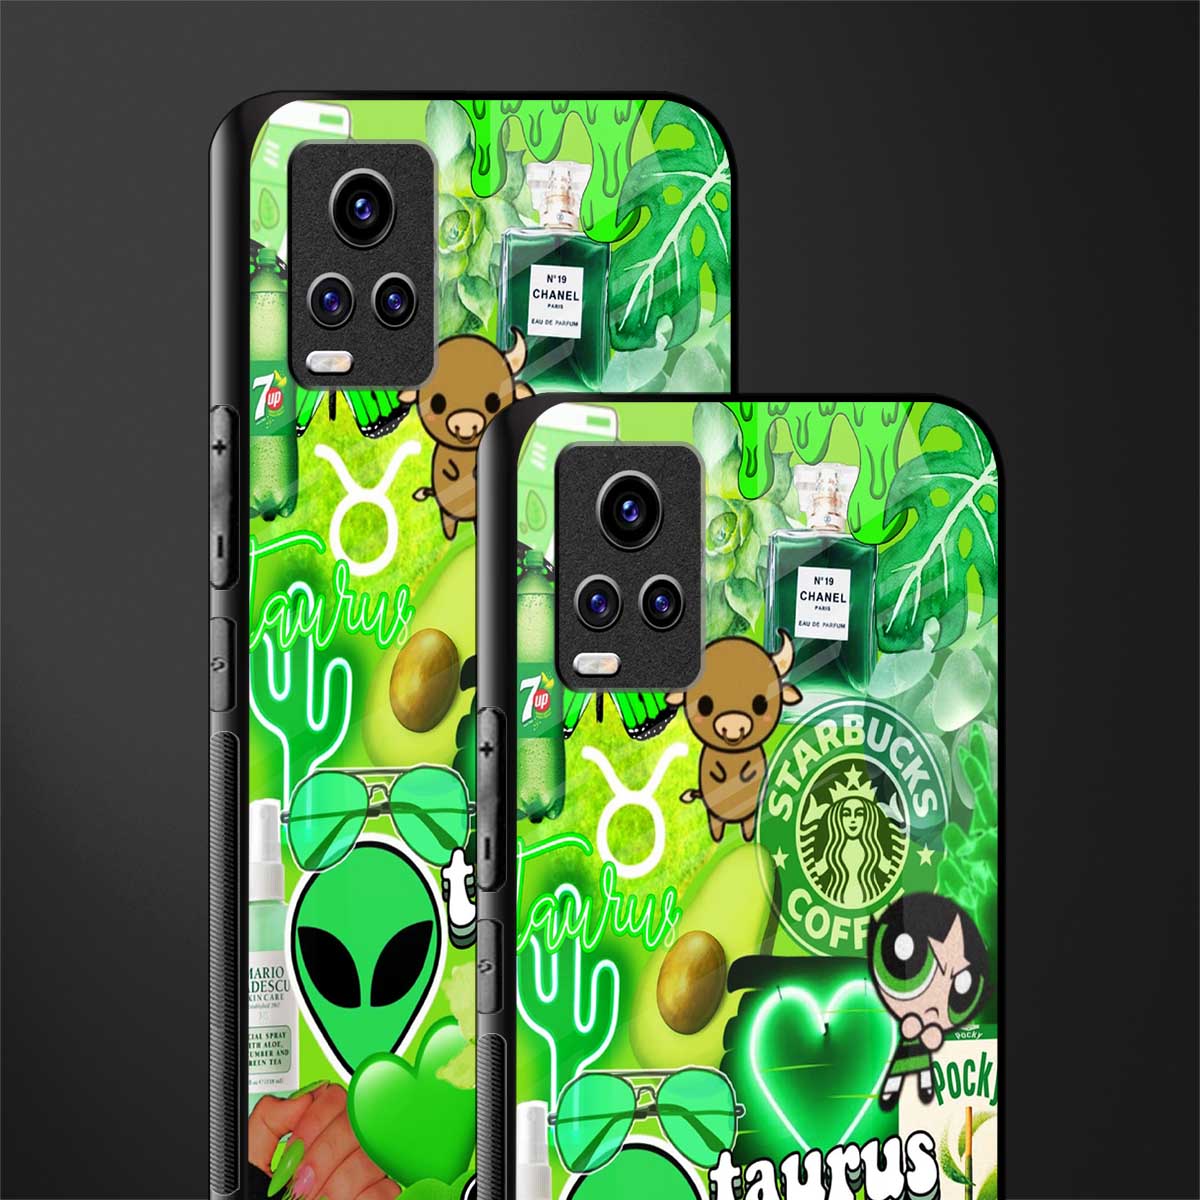 taurus aesthetic collage back phone cover | glass case for vivo y73